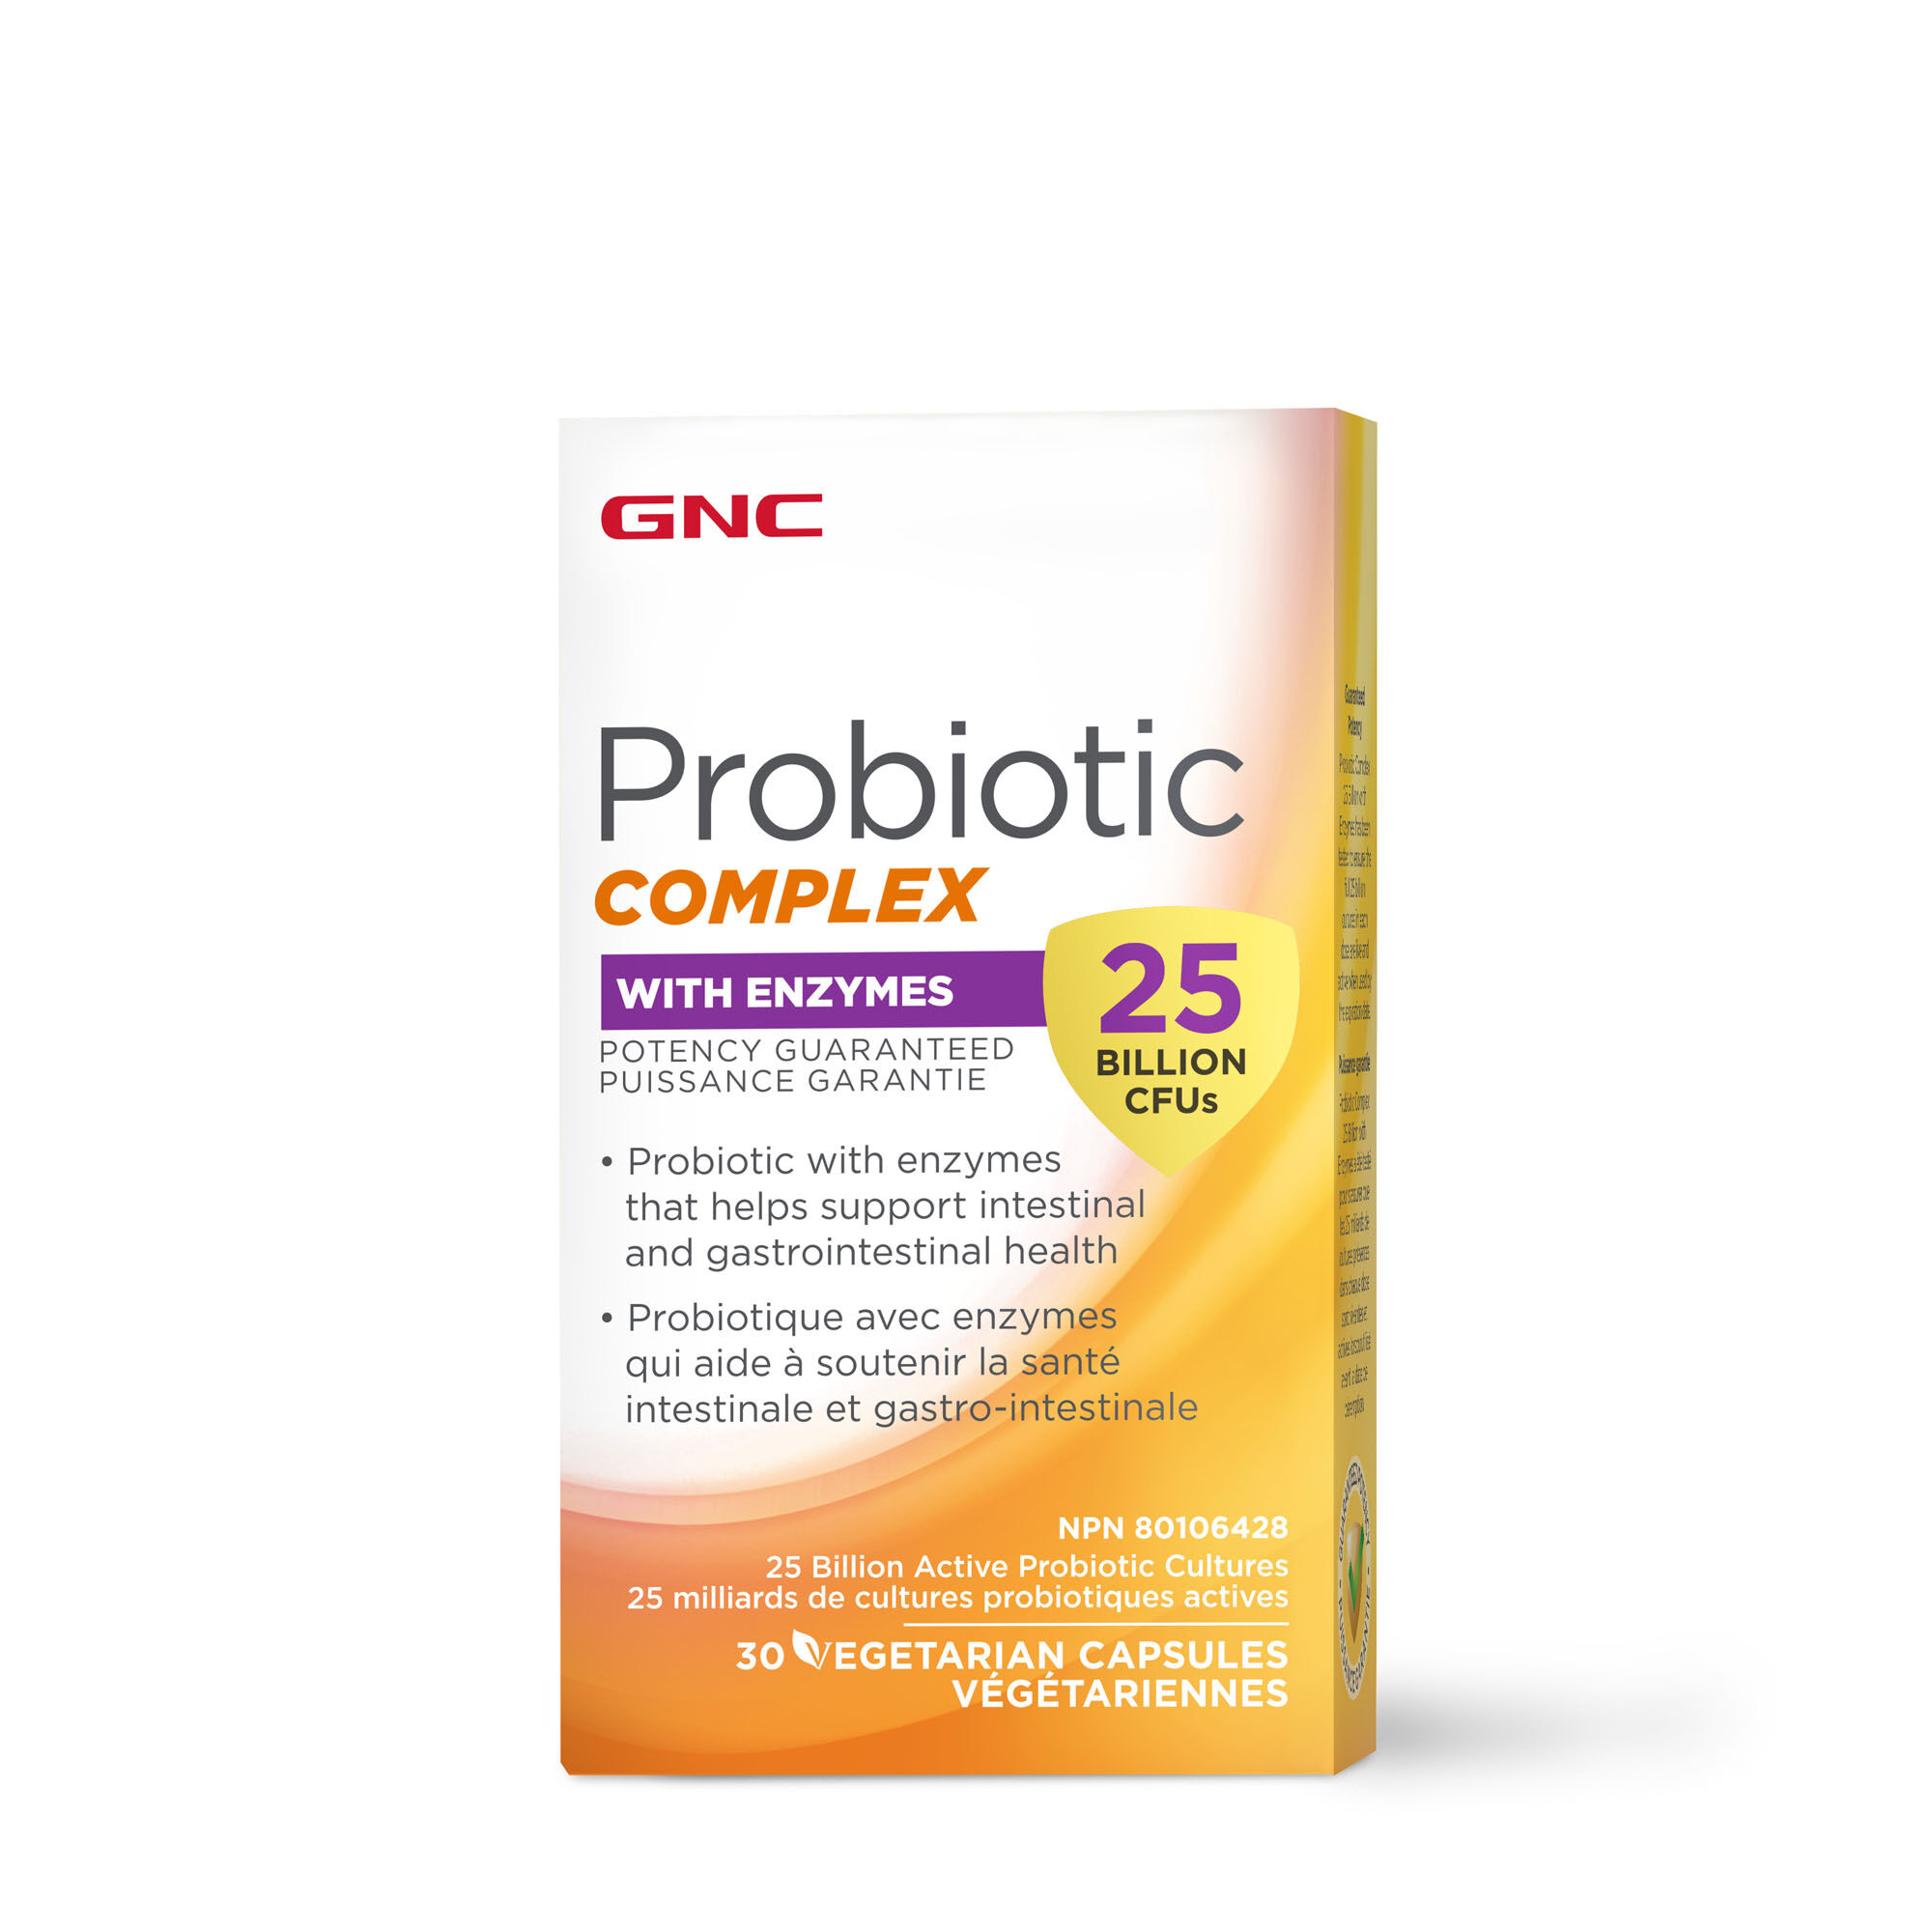 GNC Probiotic Complex with Enyzmes